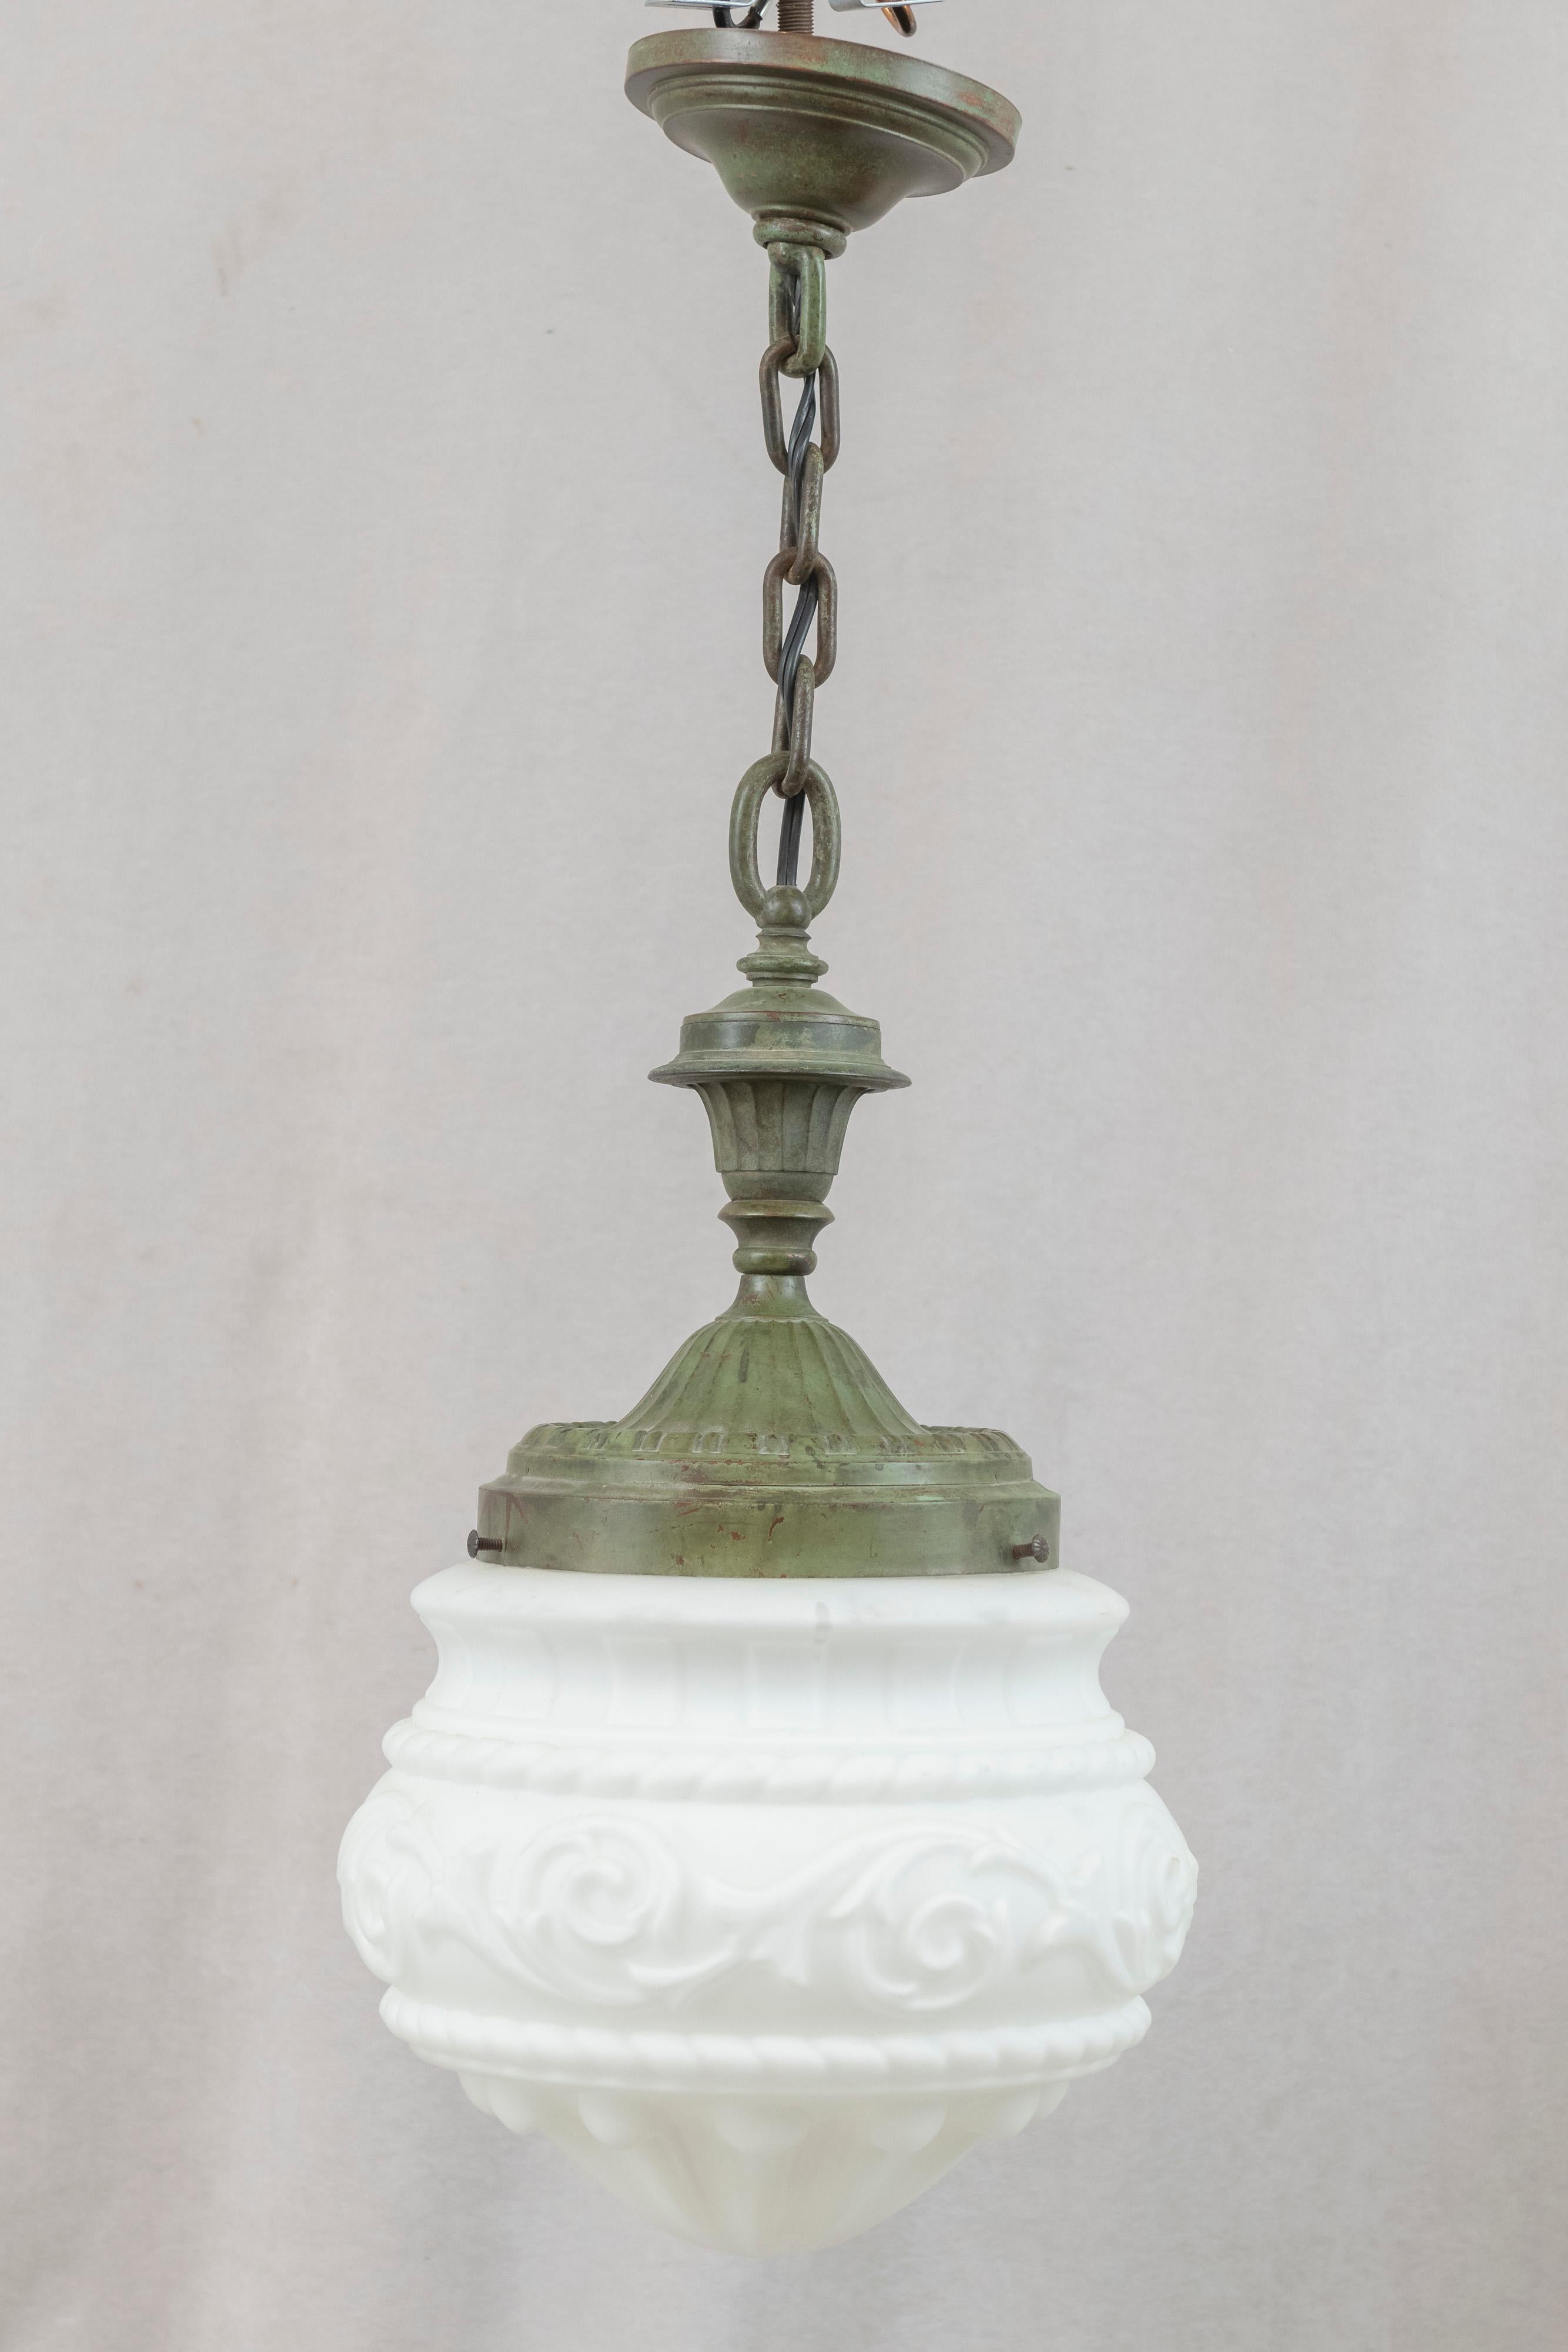 This handsome pendant is the perfect light for an entryway, hallway, or even the kitchen. The bronze metalwork was done by the noted foundry Bradley & Hubbard, and bears their signature in the ceiling canopy. Having that soft green patina on the